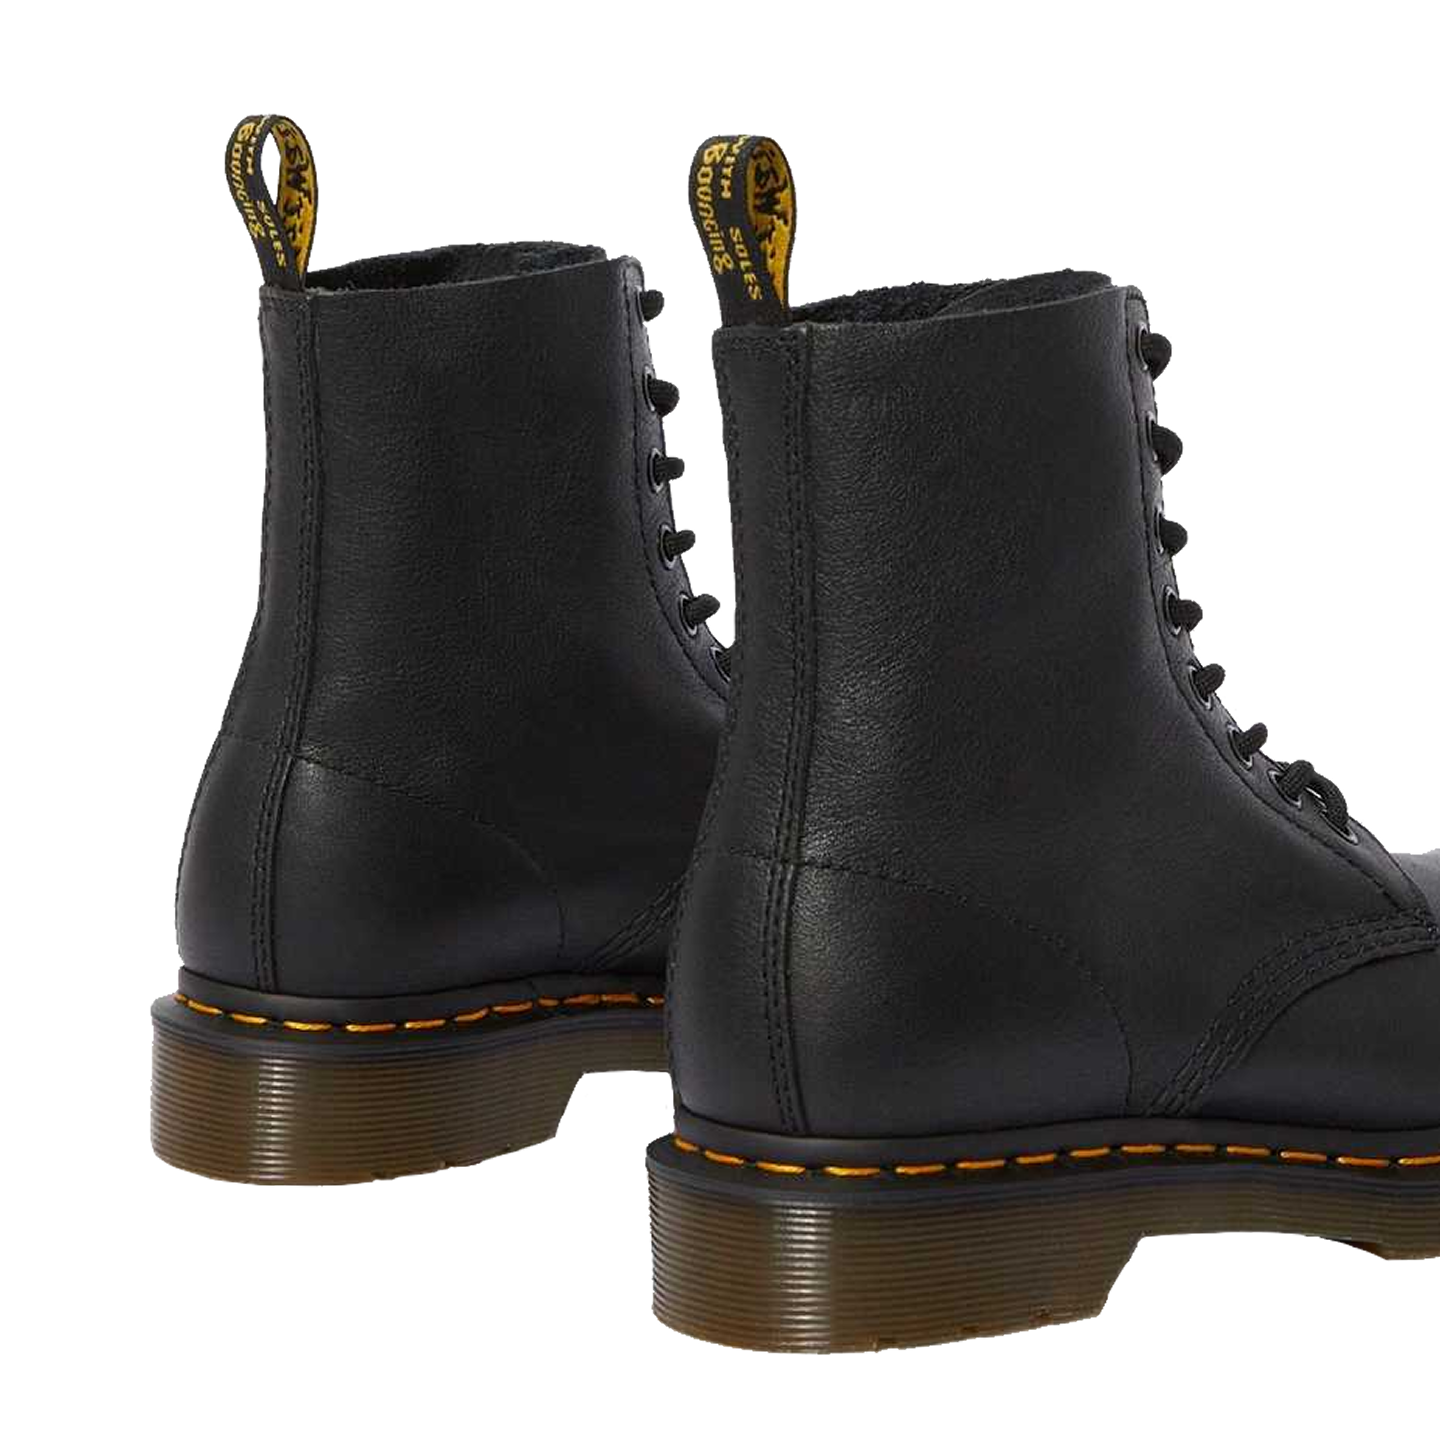 W) 1460 PASCAL - BLACK VIRGINIA LEATHER | DR. MARTENS - Momentum